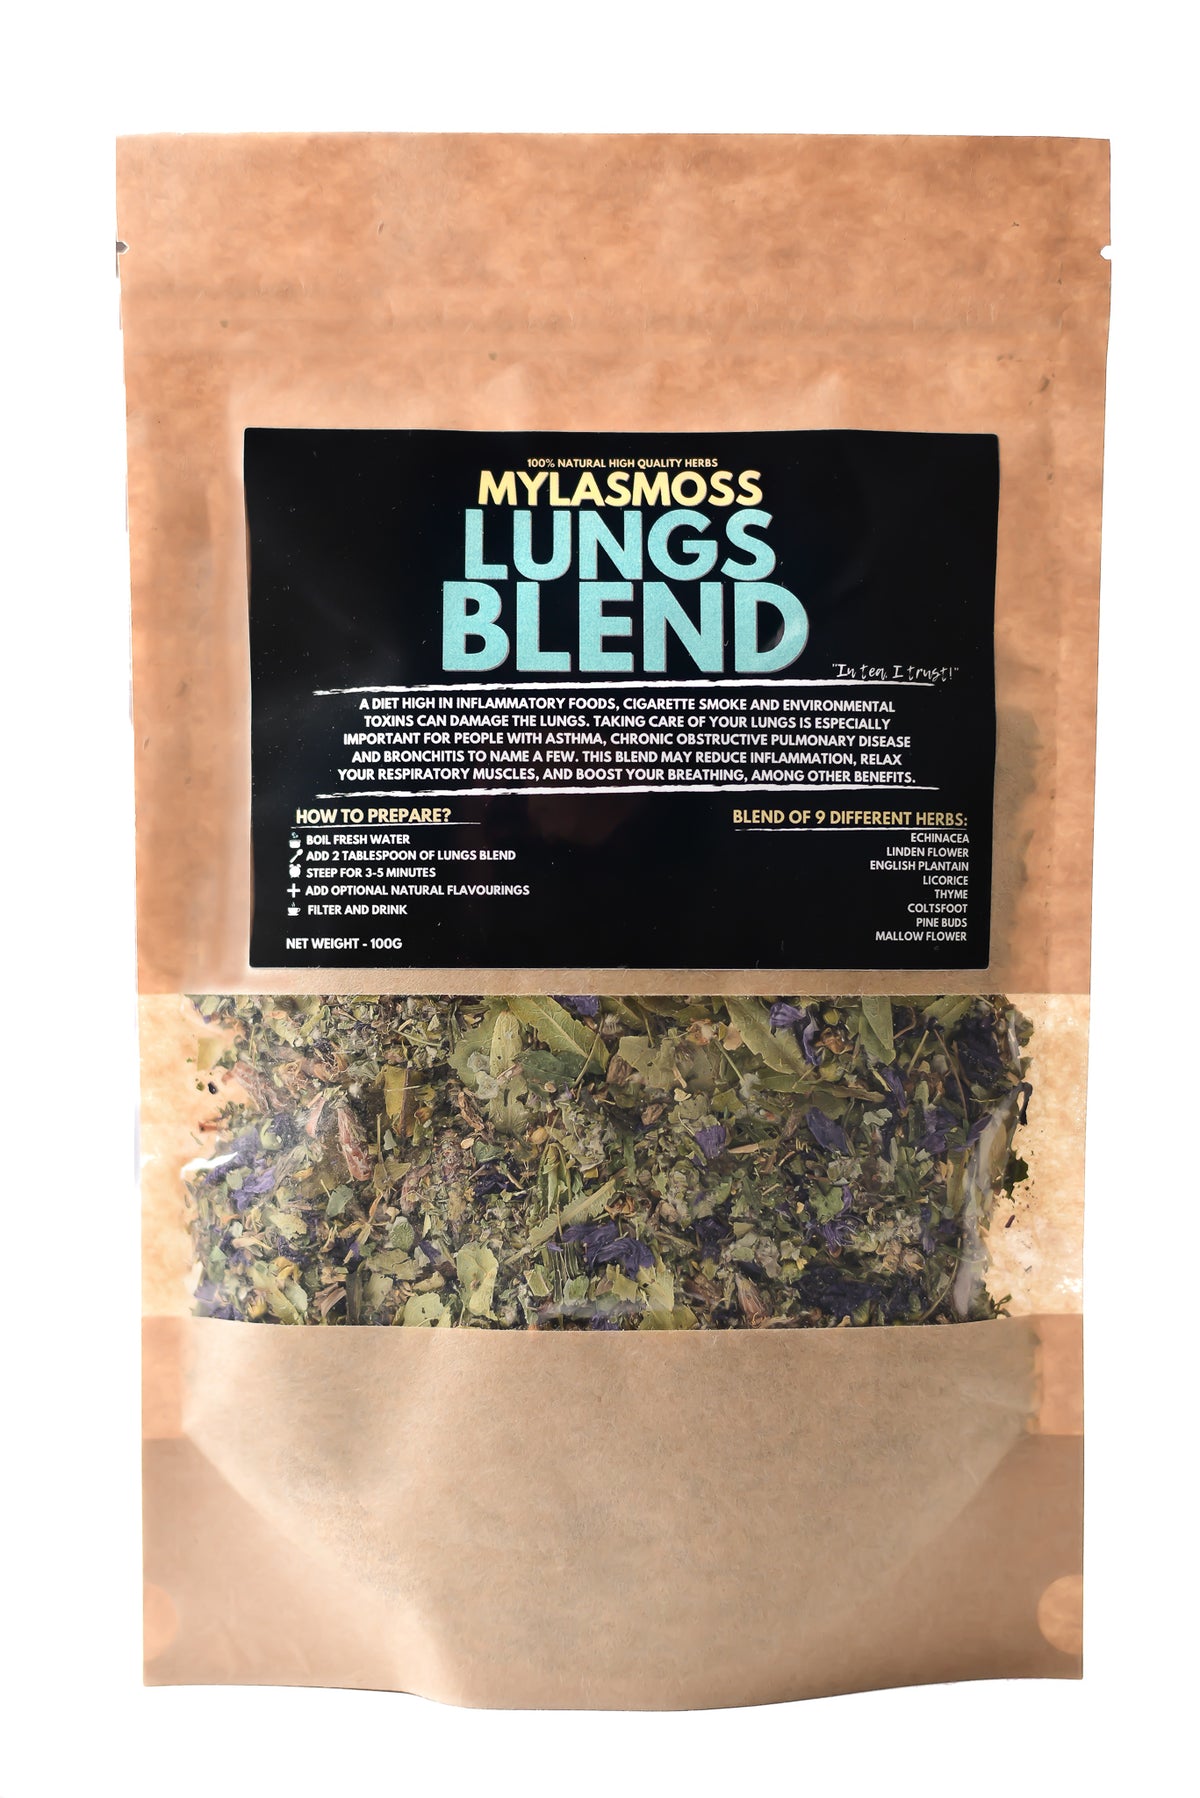 Lungs blend